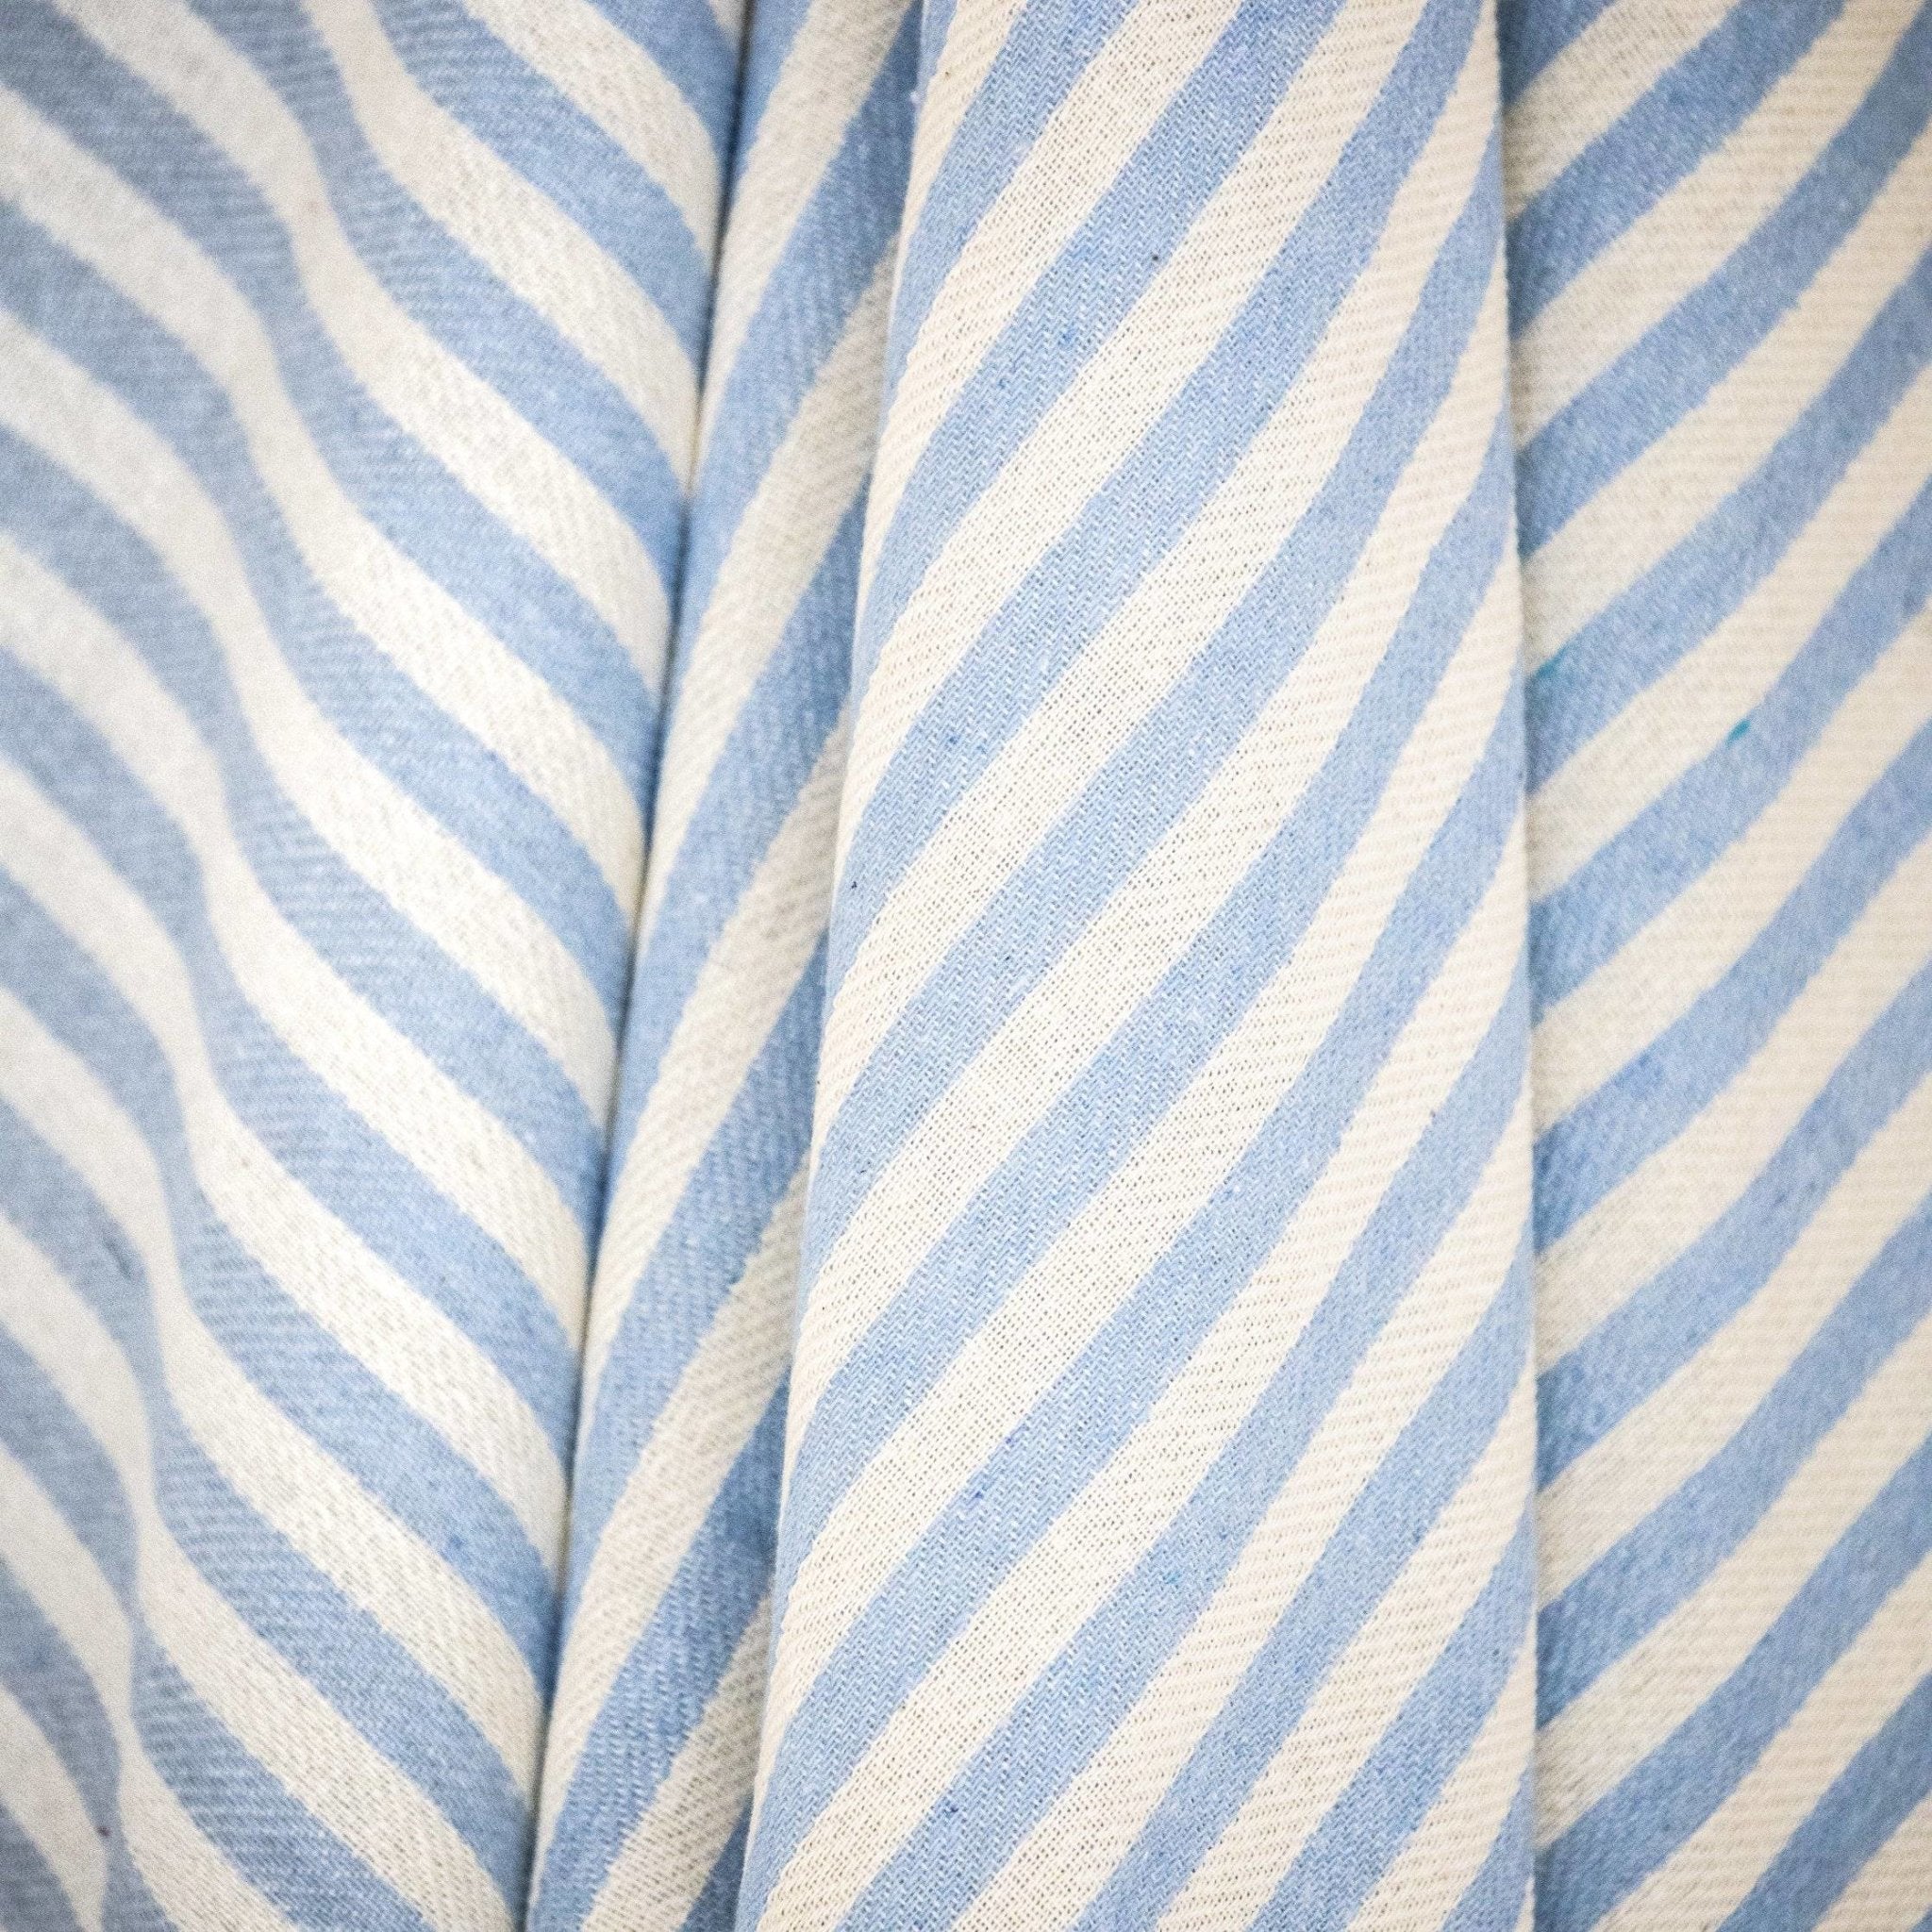 Pashtemal - Striped in Baby Blue - Near East Imports